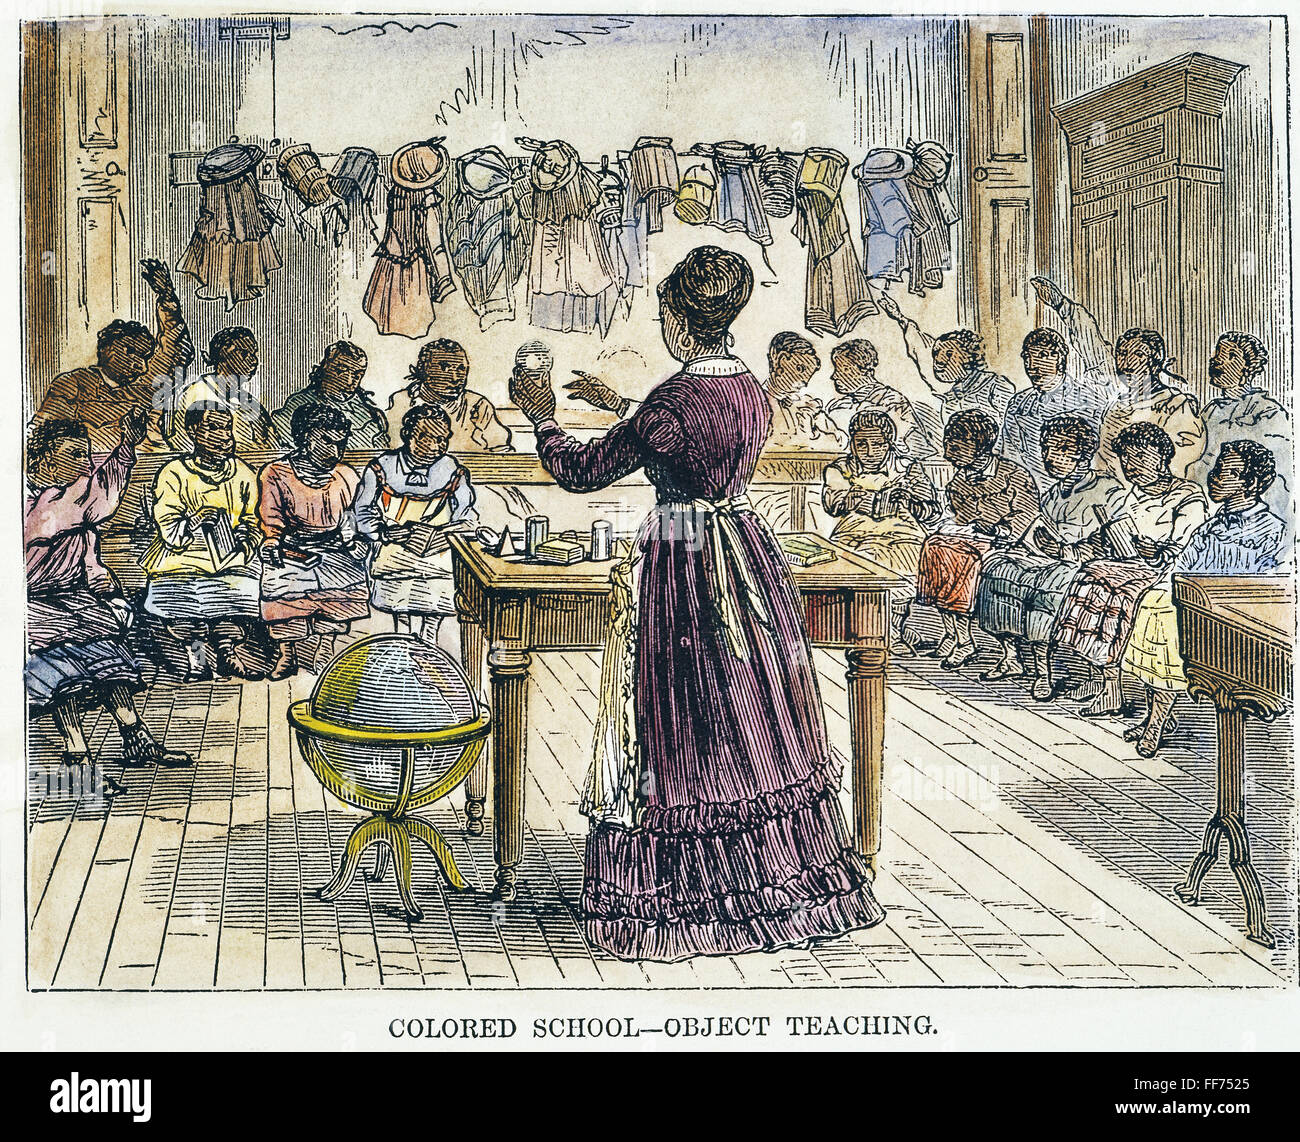 SEGREGATED SCHOOL, 1870. /nA segregated school for African Americans in New York City. Engraving, 1870. Stock Photo